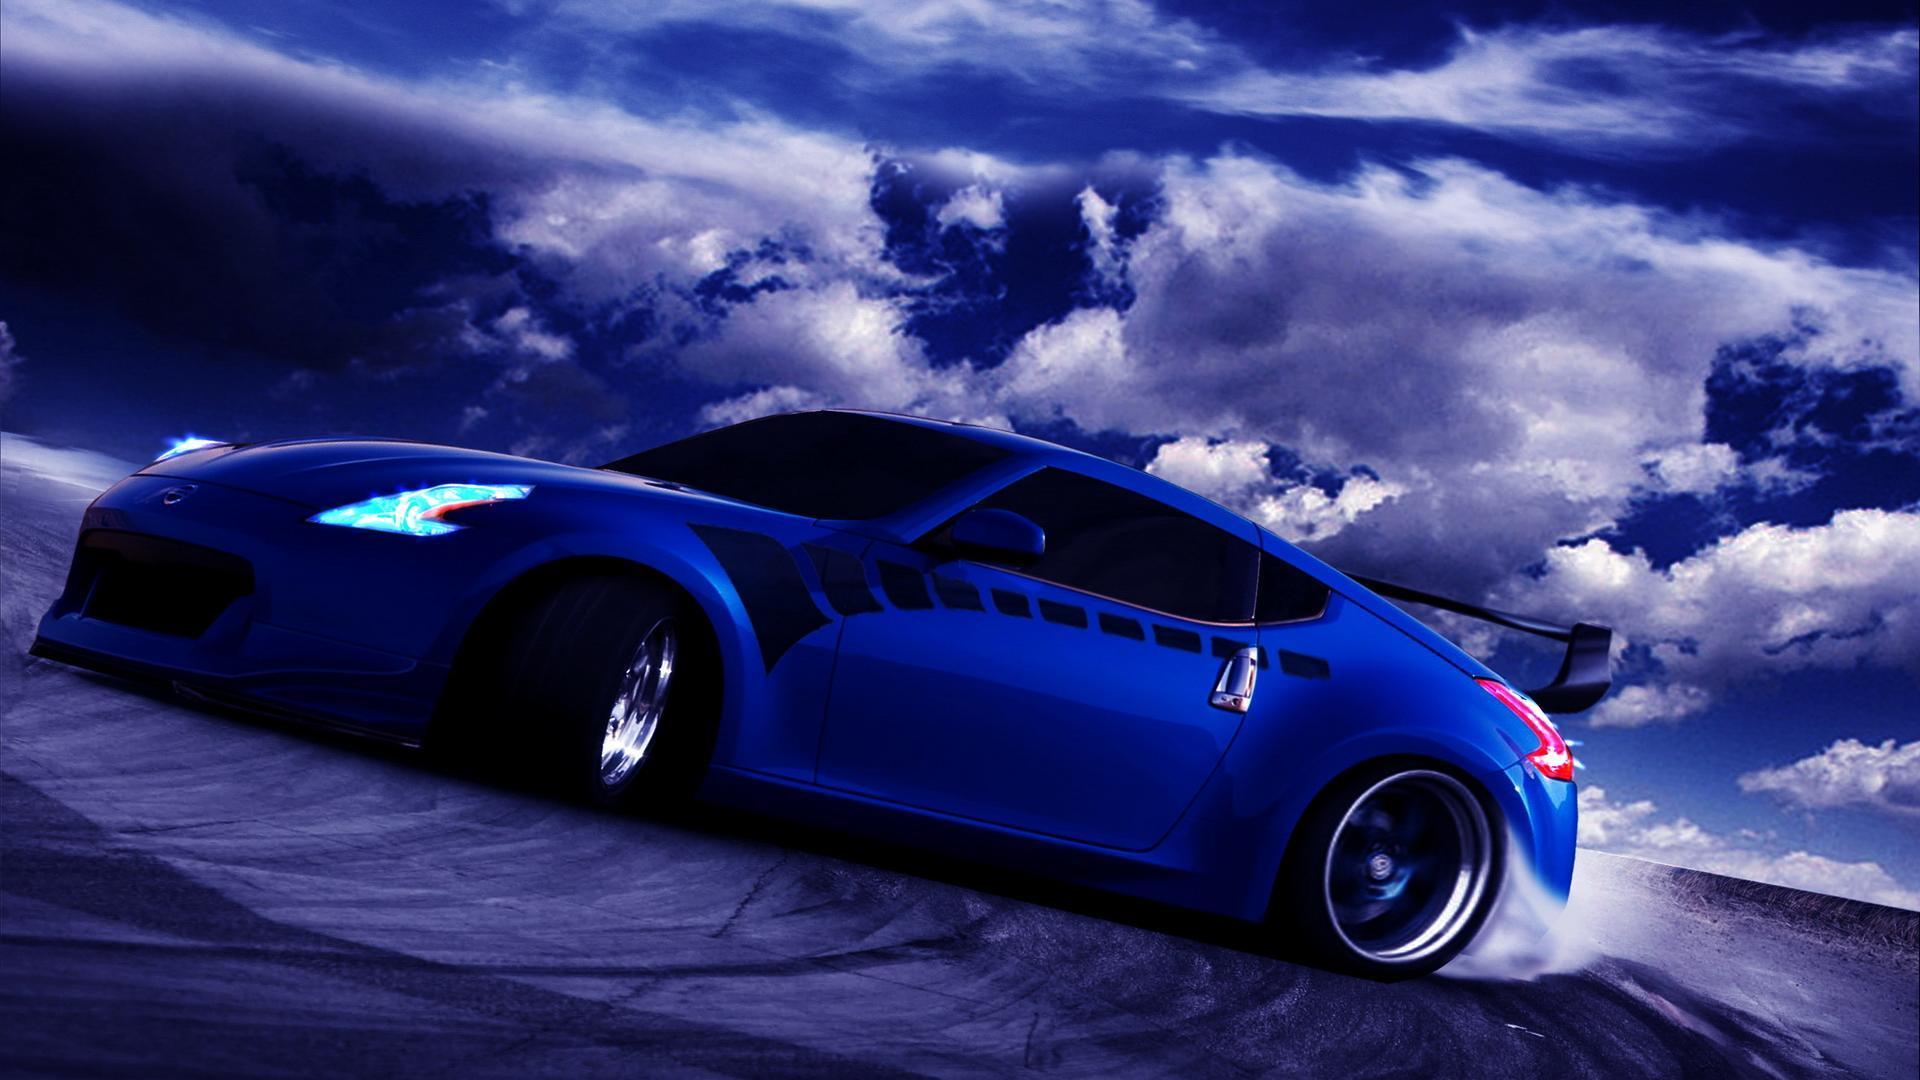 Awesome Blue Cars Wallpaper Free Awesome Blue Cars Background